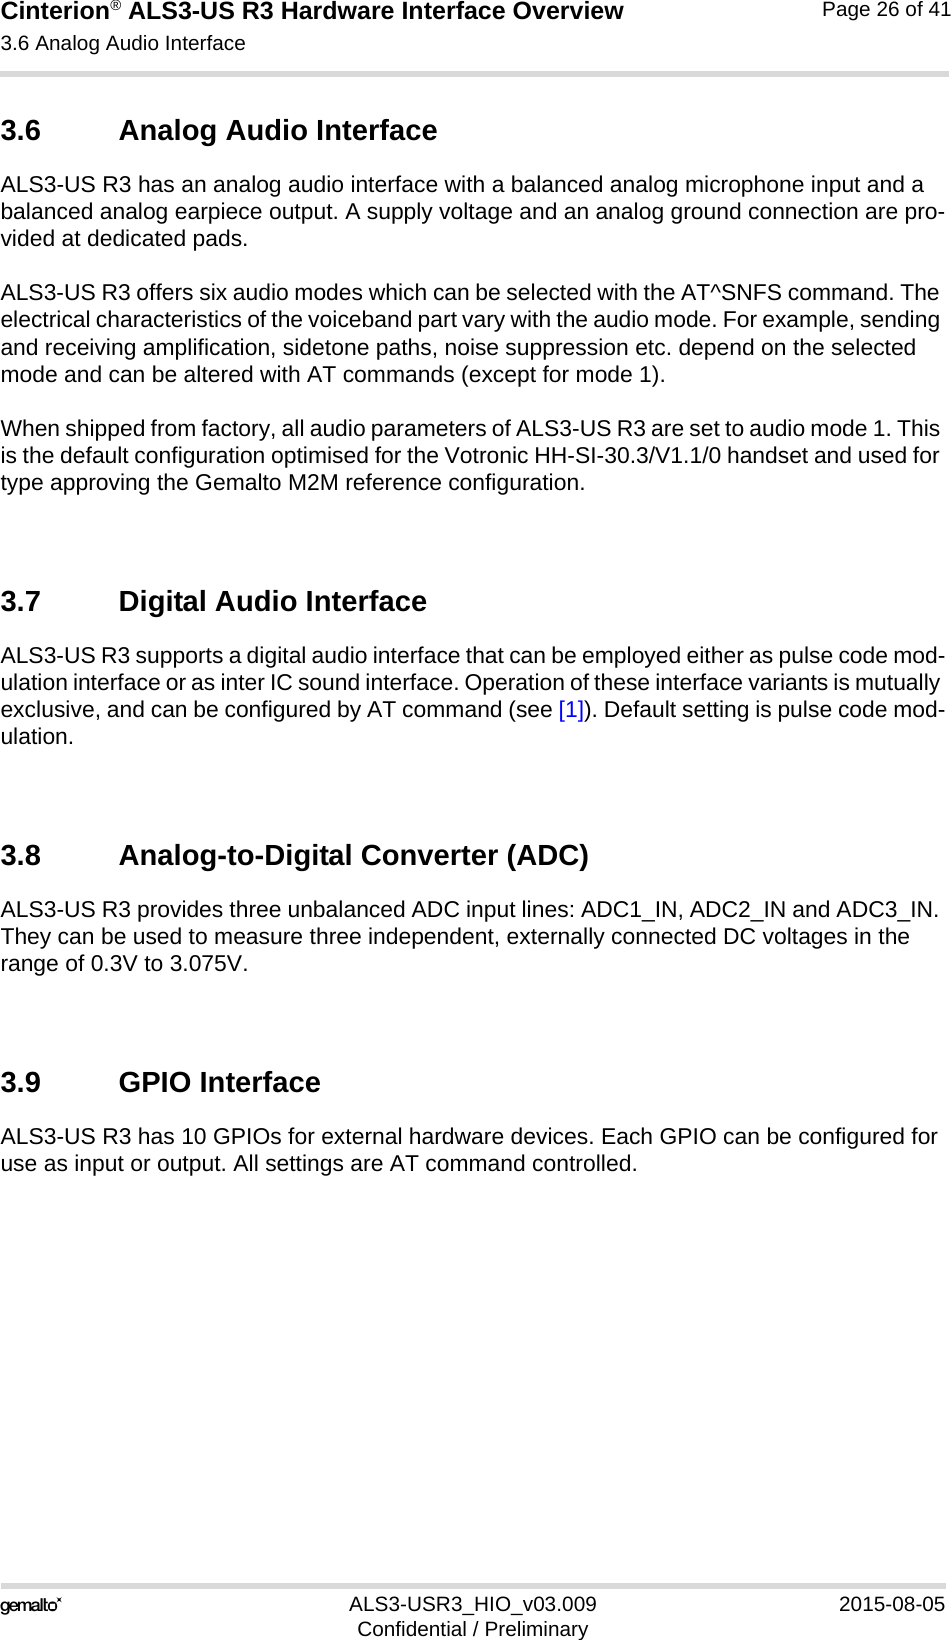 Cinterion® ALS3-US R3 Hardware Interface Overview3.6 Analog Audio Interface27ALS3-USR3_HIO_v03.009 2015-08-05Confidential / PreliminaryPage 26 of 413.6 Analog Audio InterfaceALS3-US R3 has an analog audio interface with a balanced analog microphone input and a balanced analog earpiece output. A supply voltage and an analog ground connection are pro-vided at dedicated pads.ALS3-US R3 offers six audio modes which can be selected with the AT^SNFS command. The electrical characteristics of the voiceband part vary with the audio mode. For example, sending and receiving amplification, sidetone paths, noise suppression etc. depend on the selected mode and can be altered with AT commands (except for mode 1).When shipped from factory, all audio parameters of ALS3-US R3 are set to audio mode 1. This is the default configuration optimised for the Votronic HH-SI-30.3/V1.1/0 handset and used for type approving the Gemalto M2M reference configuration. 3.7 Digital Audio InterfaceALS3-US R3 supports a digital audio interface that can be employed either as pulse code mod-ulation interface or as inter IC sound interface. Operation of these interface variants is mutually exclusive, and can be configured by AT command (see [1]). Default setting is pulse code mod-ulation.3.8 Analog-to-Digital Converter (ADC)ALS3-US R3 provides three unbalanced ADC input lines: ADC1_IN, ADC2_IN and ADC3_IN. They can be used to measure three independent, externally connected DC voltages in the range of 0.3V to 3.075V. 3.9 GPIO InterfaceALS3-US R3 has 10 GPIOs for external hardware devices. Each GPIO can be configured for use as input or output. All settings are AT command controlled. 